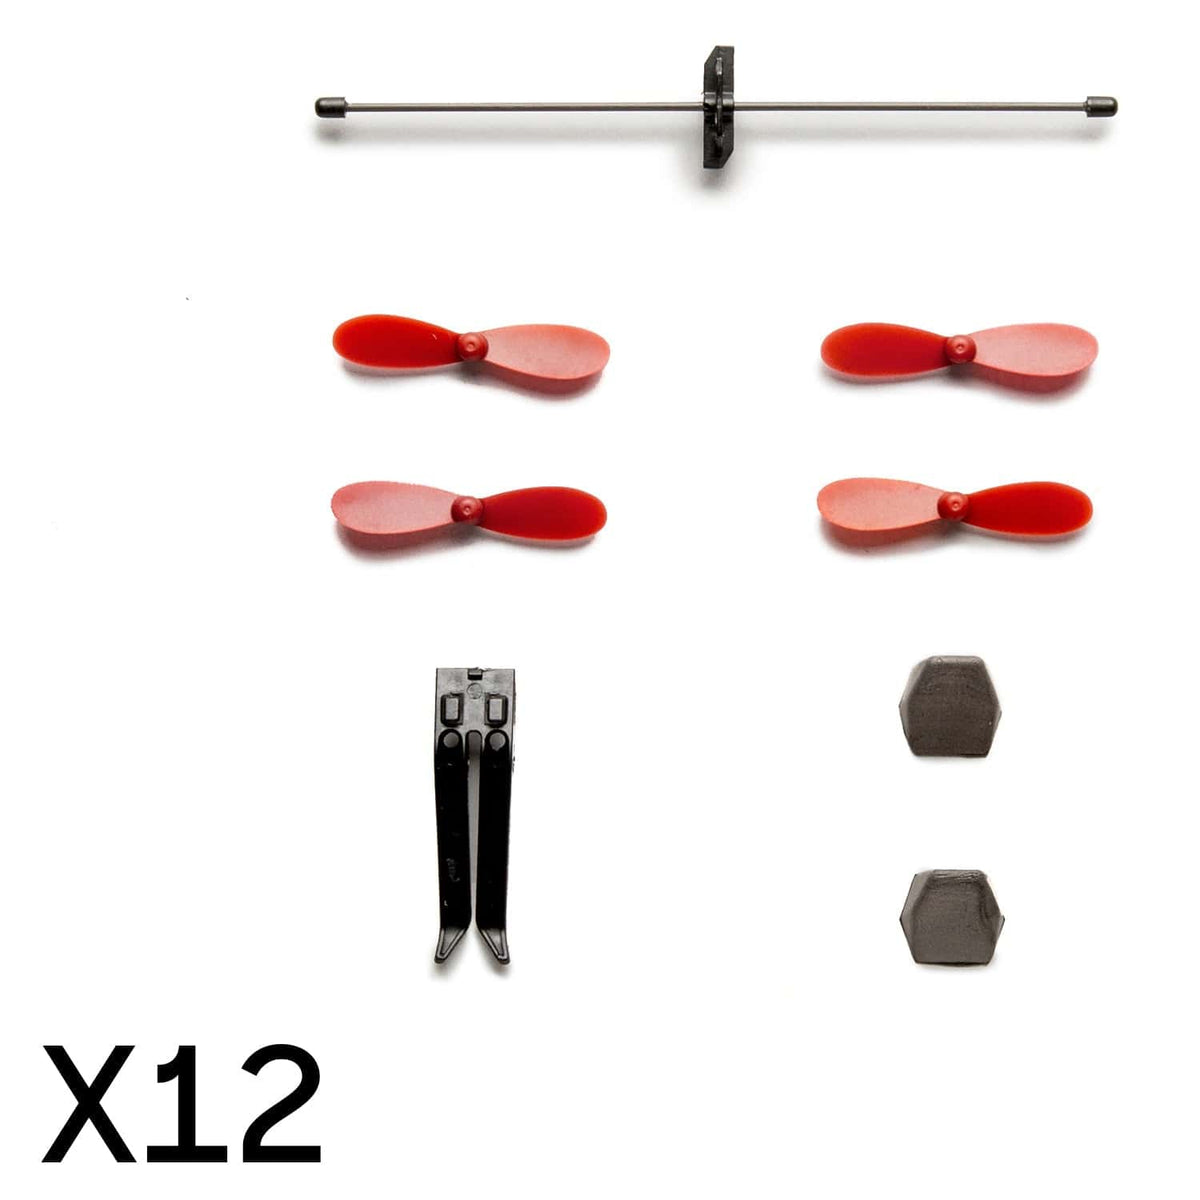 POWERUP 4.0 SPARE PARTS (12 COUNT)